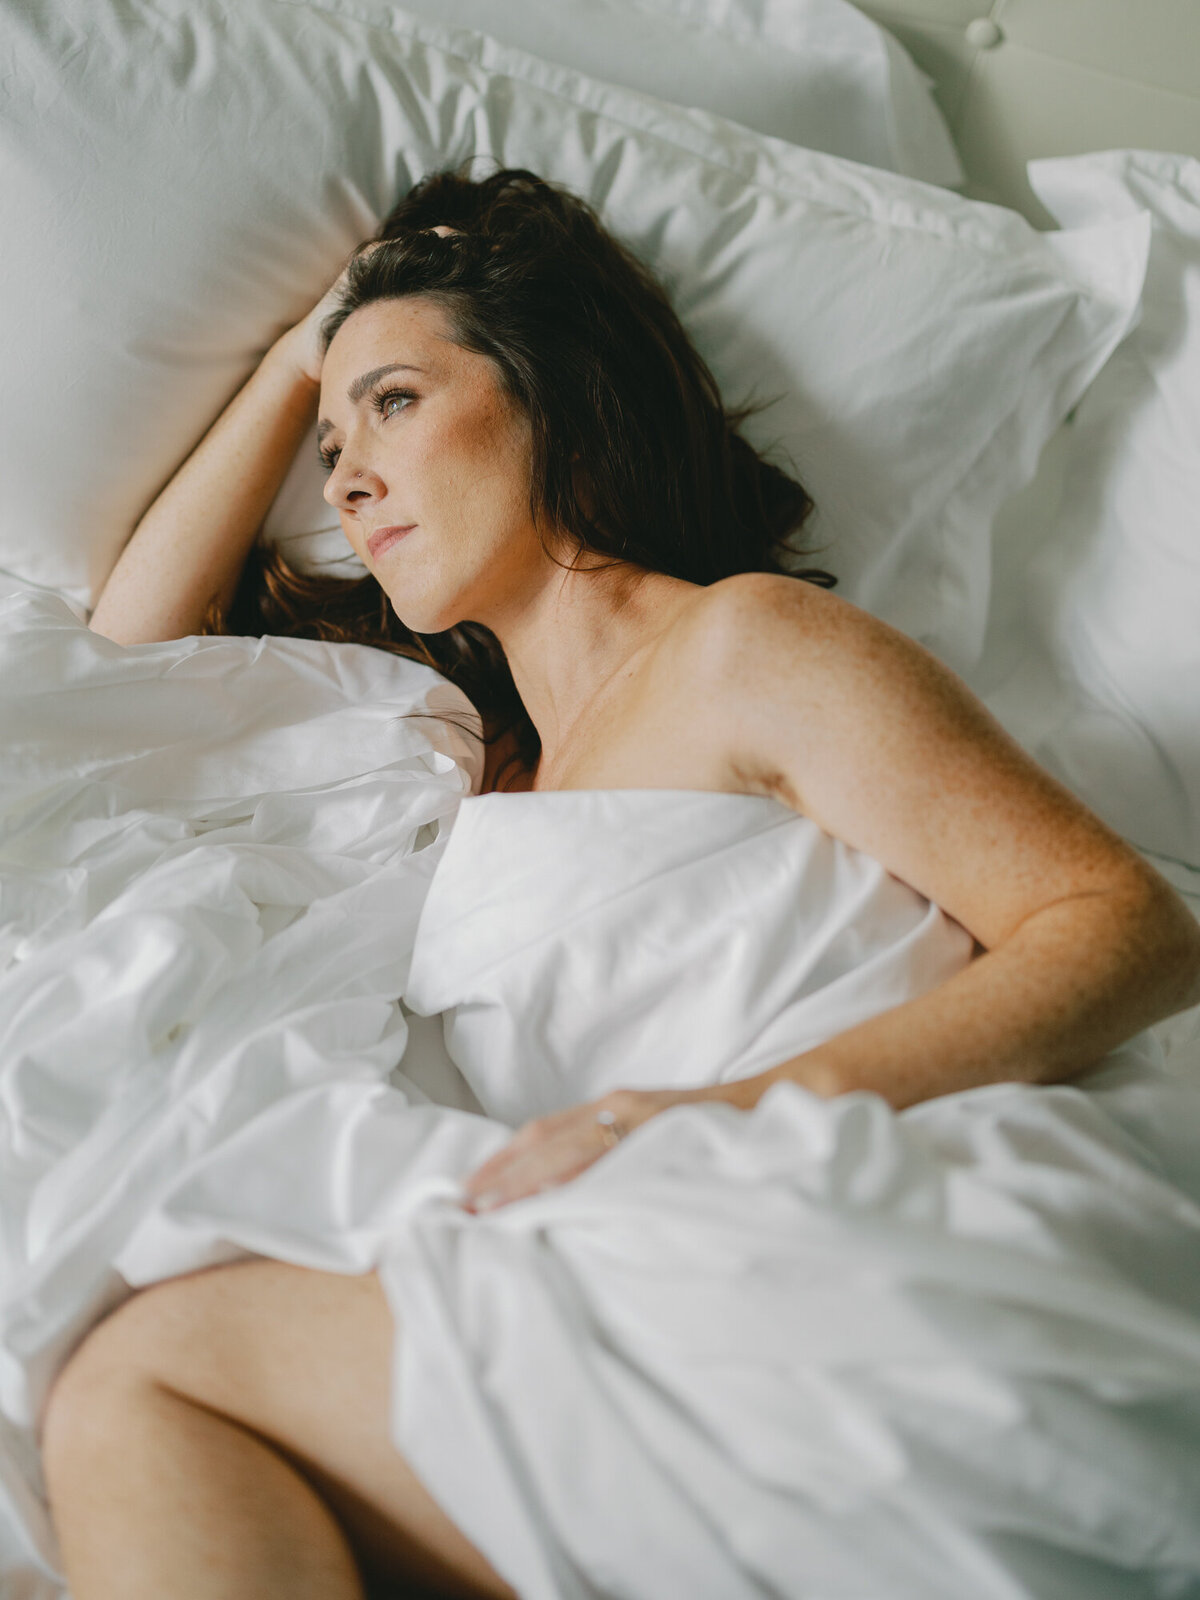 A woman wraps herself in bed sheets as she poses for a boudoir photo